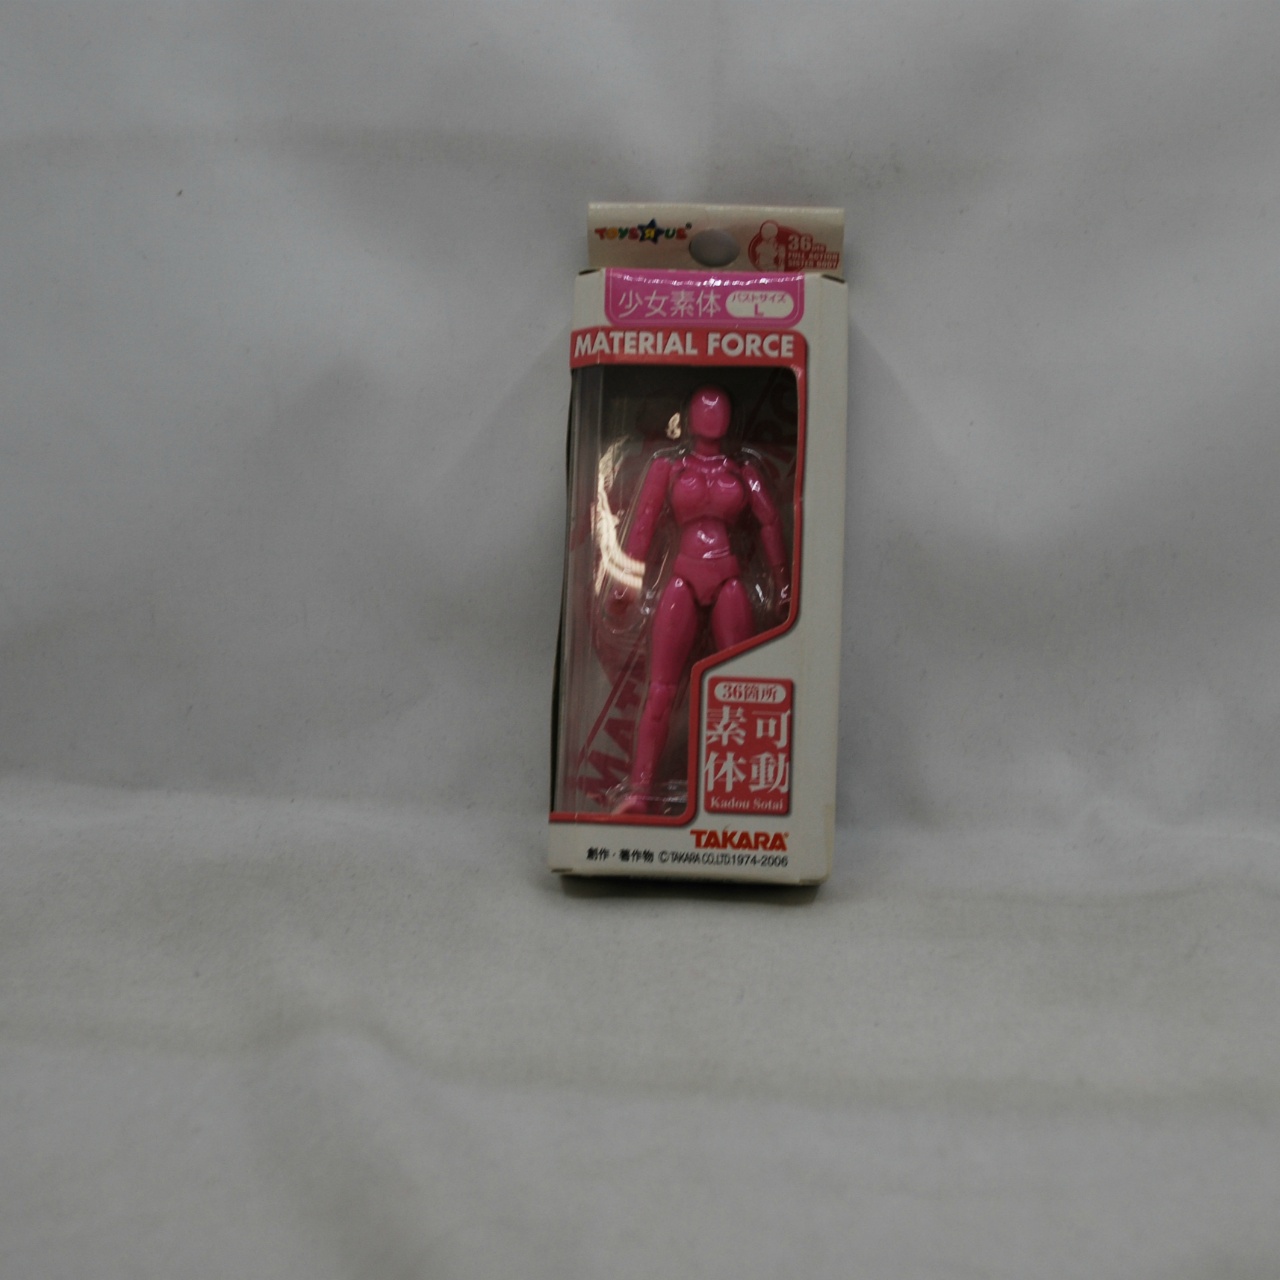 MICROMAN ToysRus Exclusive Material Force Female Boby Bust L - Pink